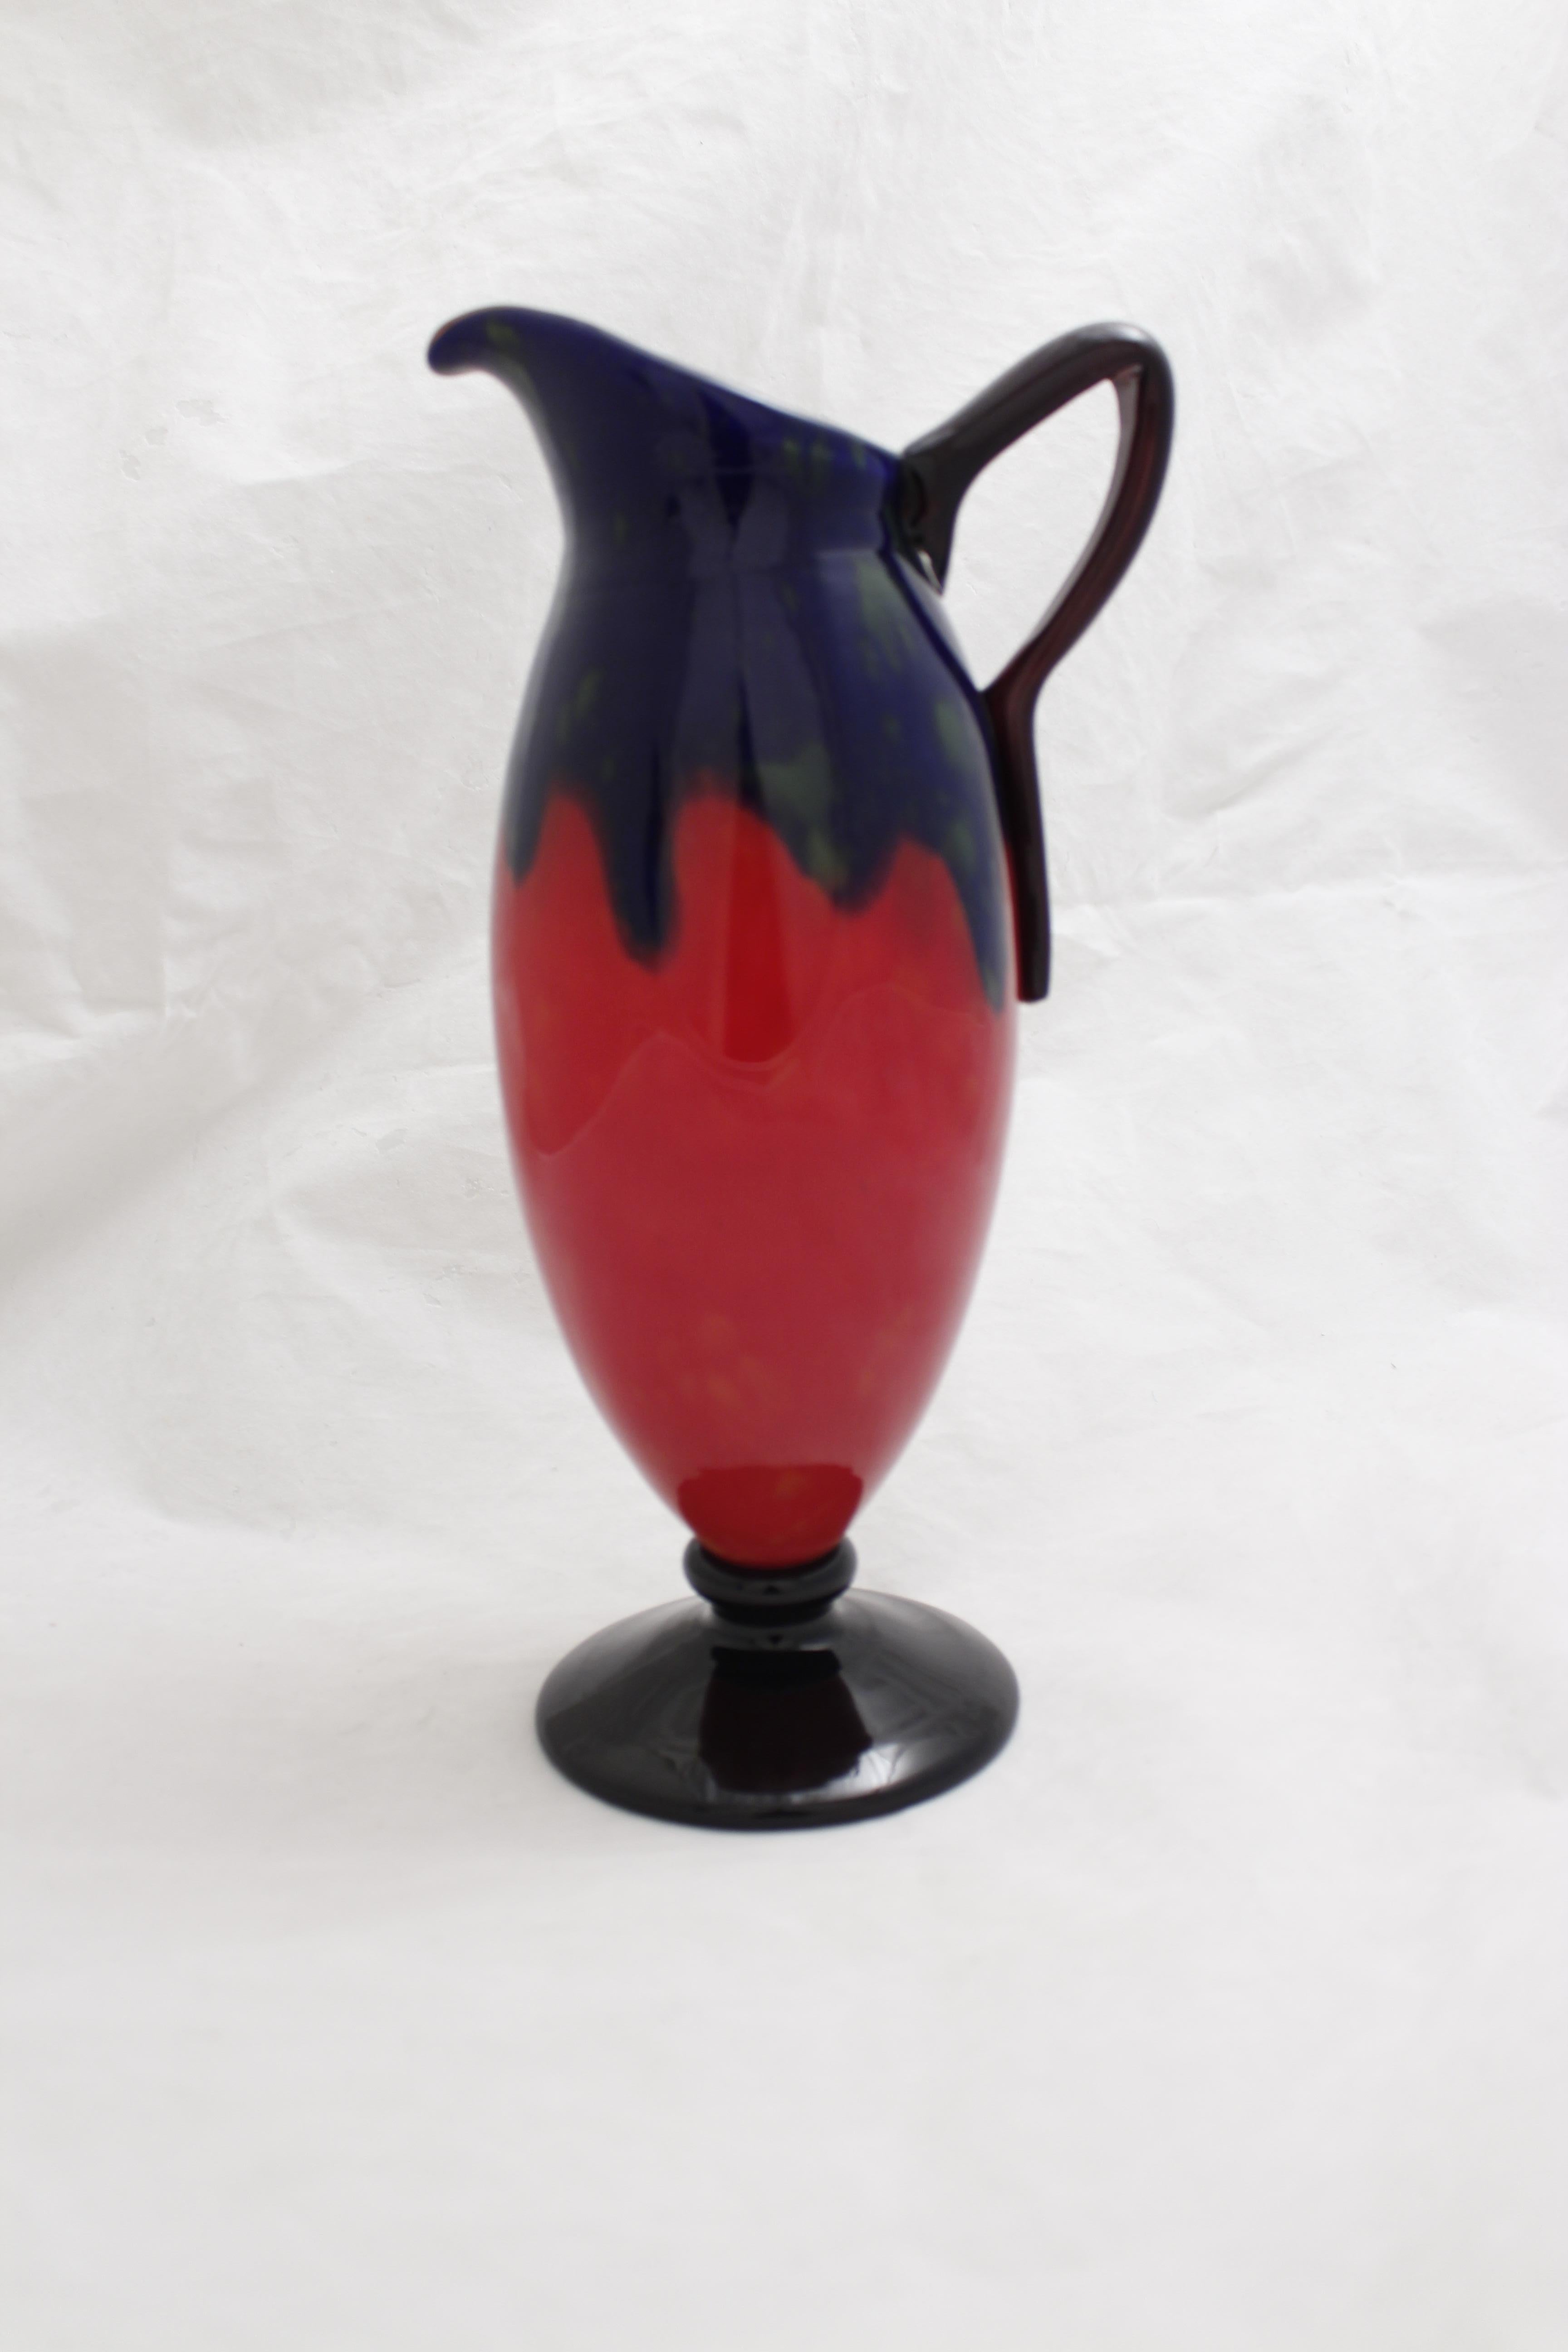 Vase Sign: Schneider 
Schneider
Charles Schneider (1881-1953) studied art in two of most prestigious French school of the Arts. First in the School of Fine Arts in Nancy, then in the elite Ecole des Beaux Arts in Paris. While at Nancy, Charles